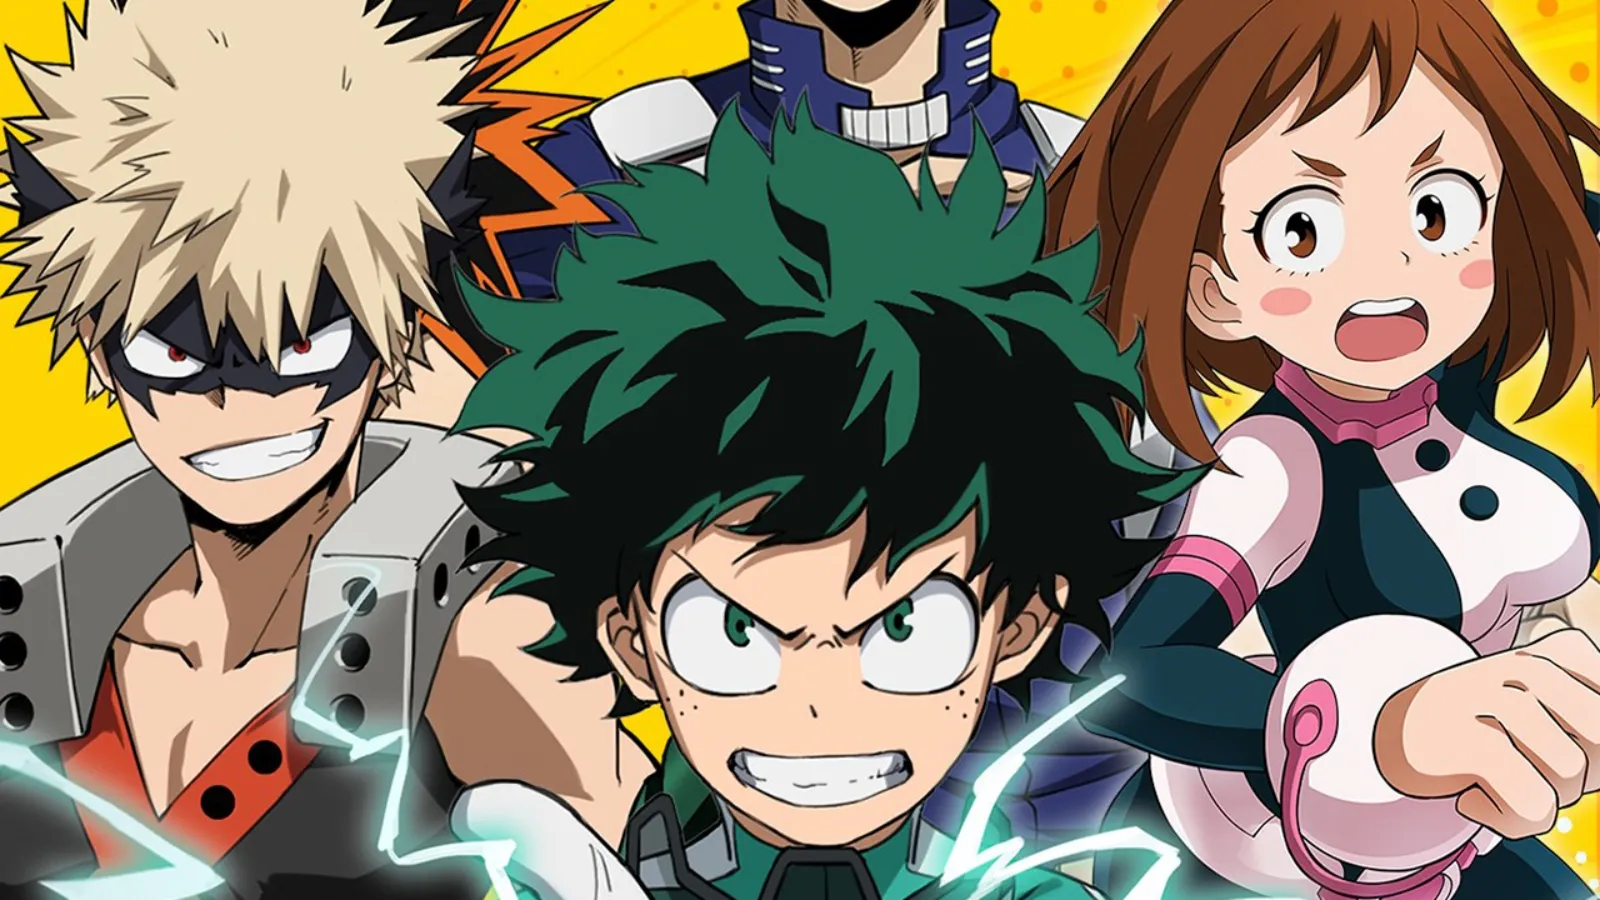 How To Watch My Hero Academia In Order - We Got This Covered